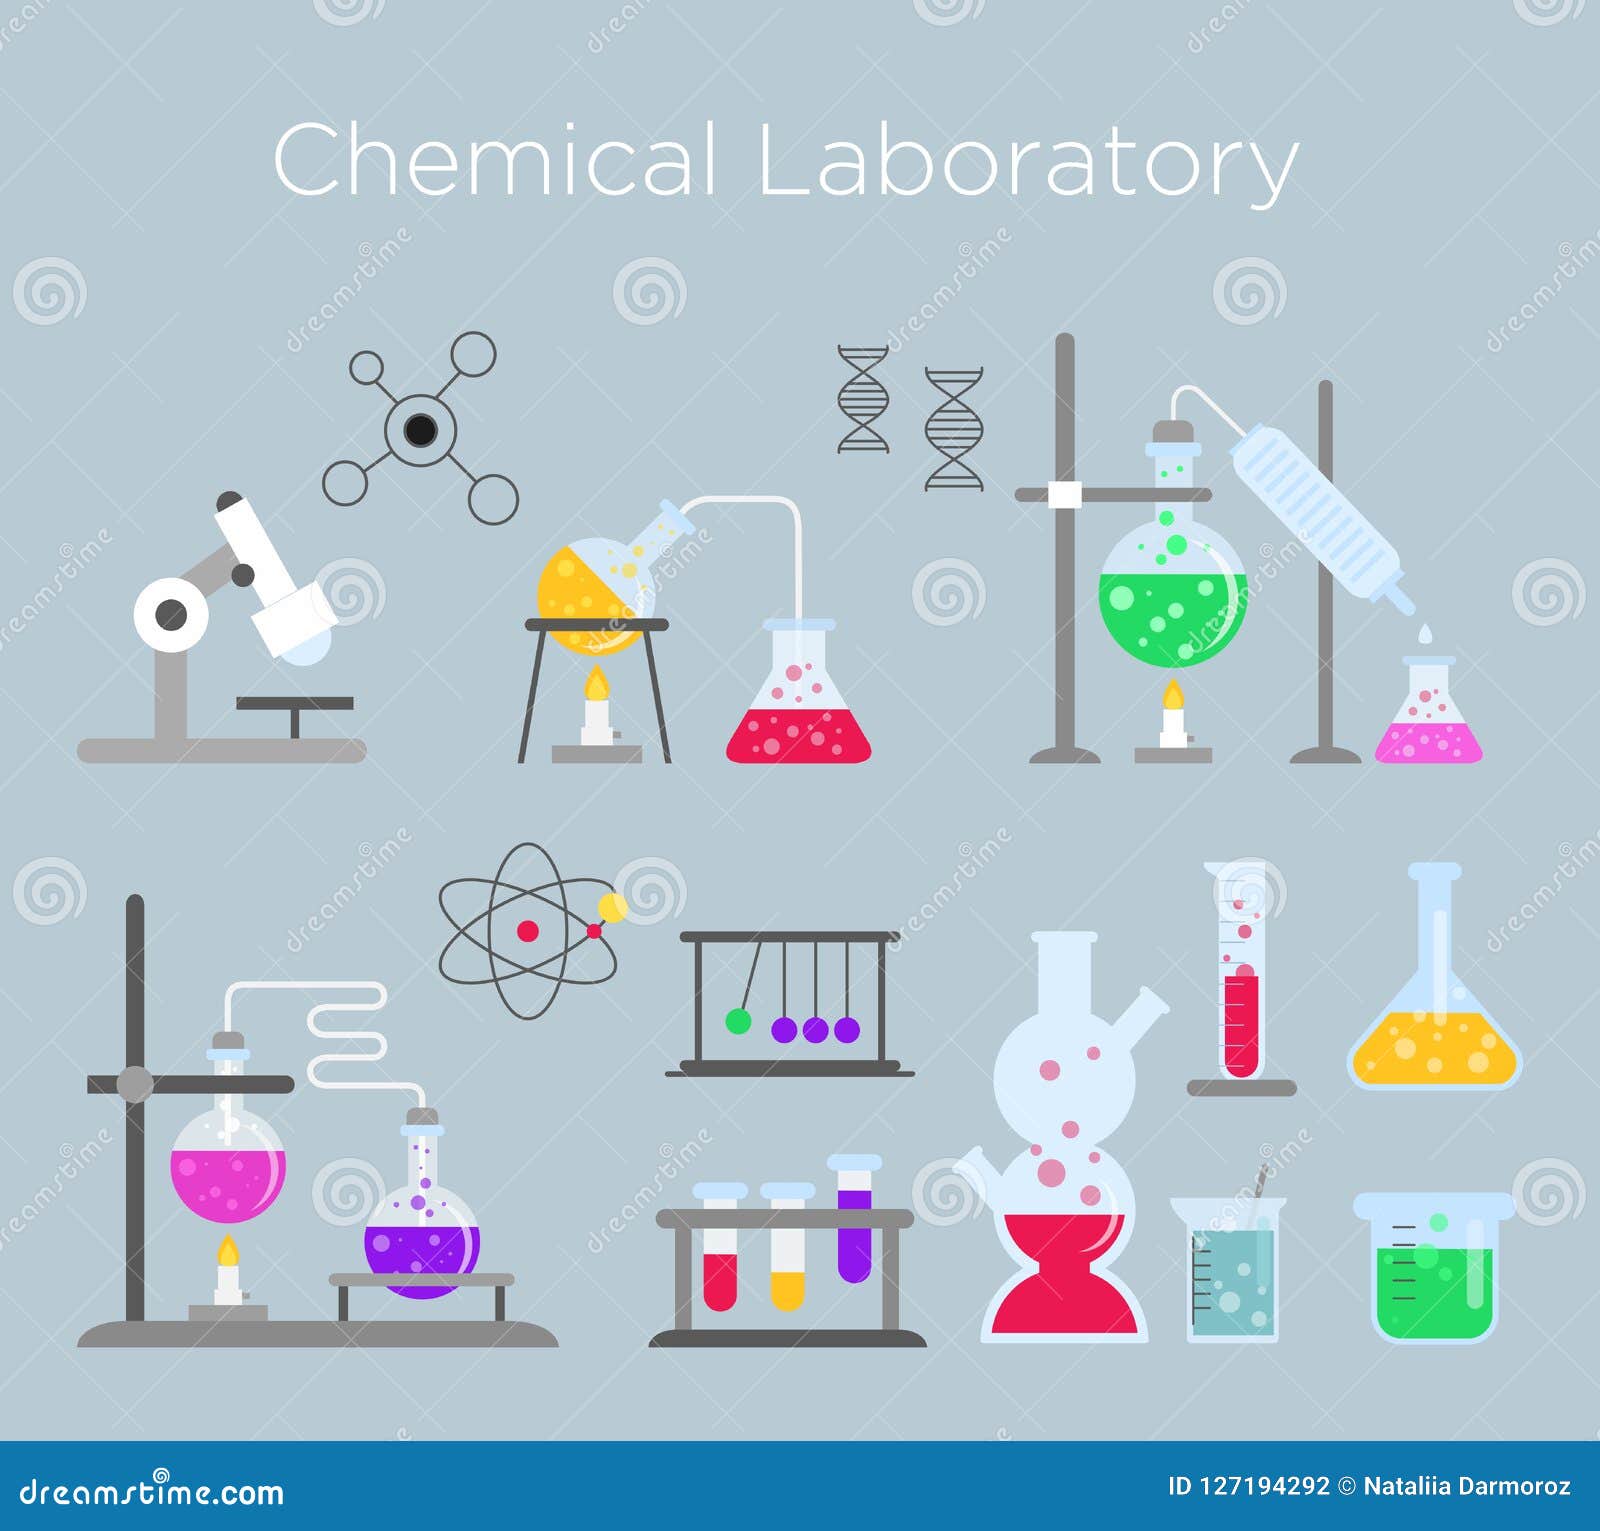 Vector Illustration Set of Chemical Laboratory Equipment. Chemical ...